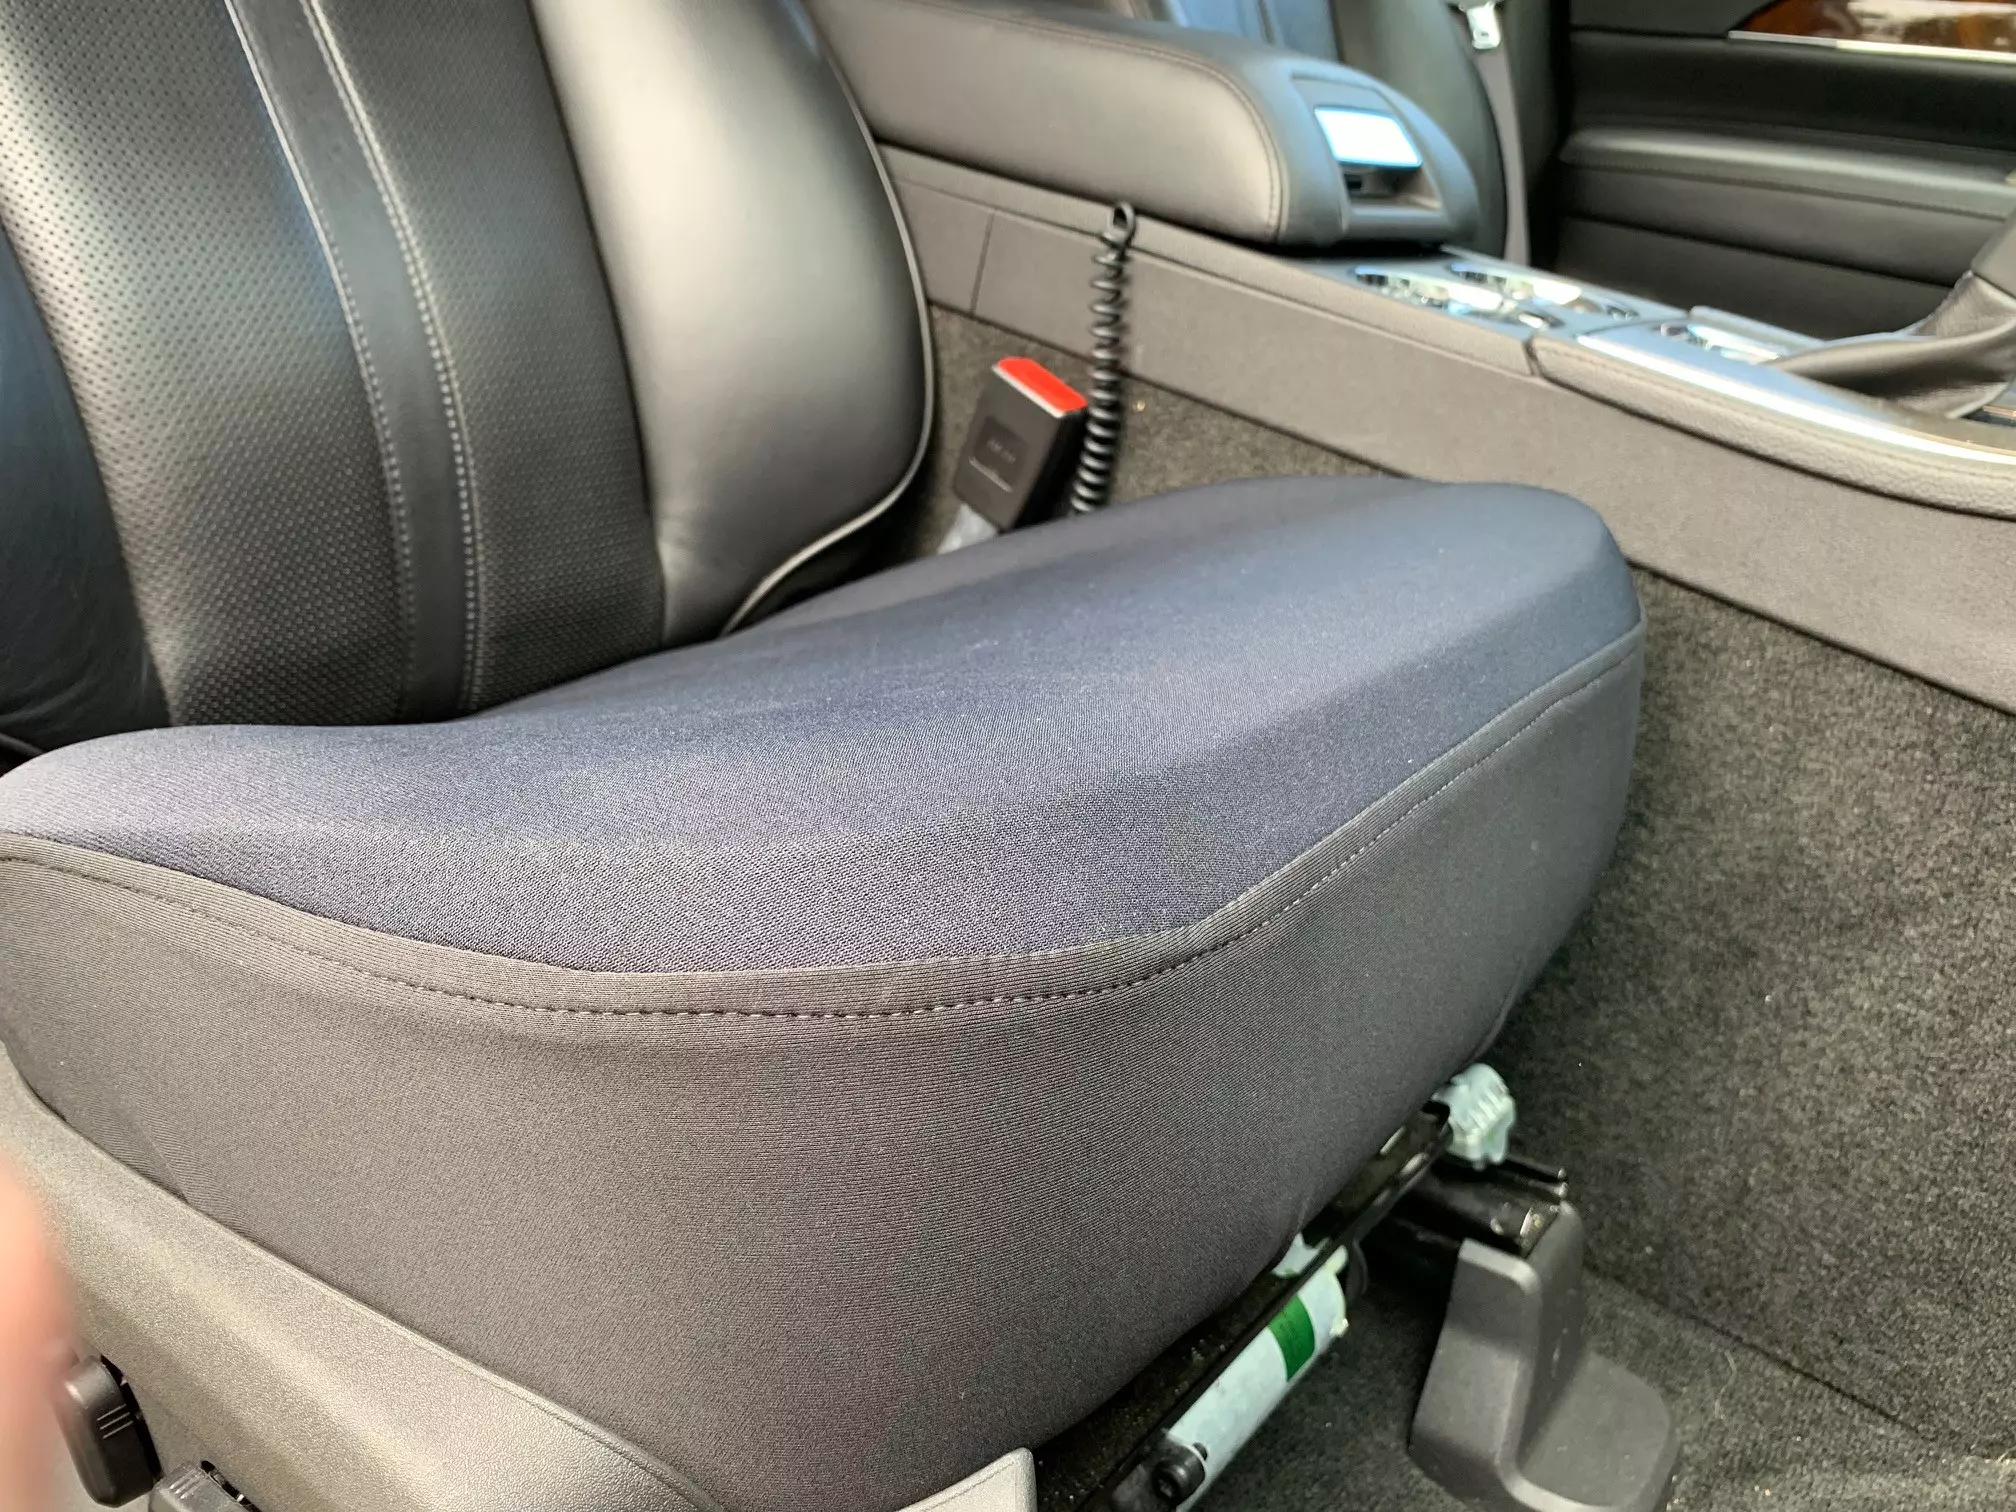 Bottom Only Seat Cover for a Subaru Outback 2015-2019-(PAIR) Neoprene Material